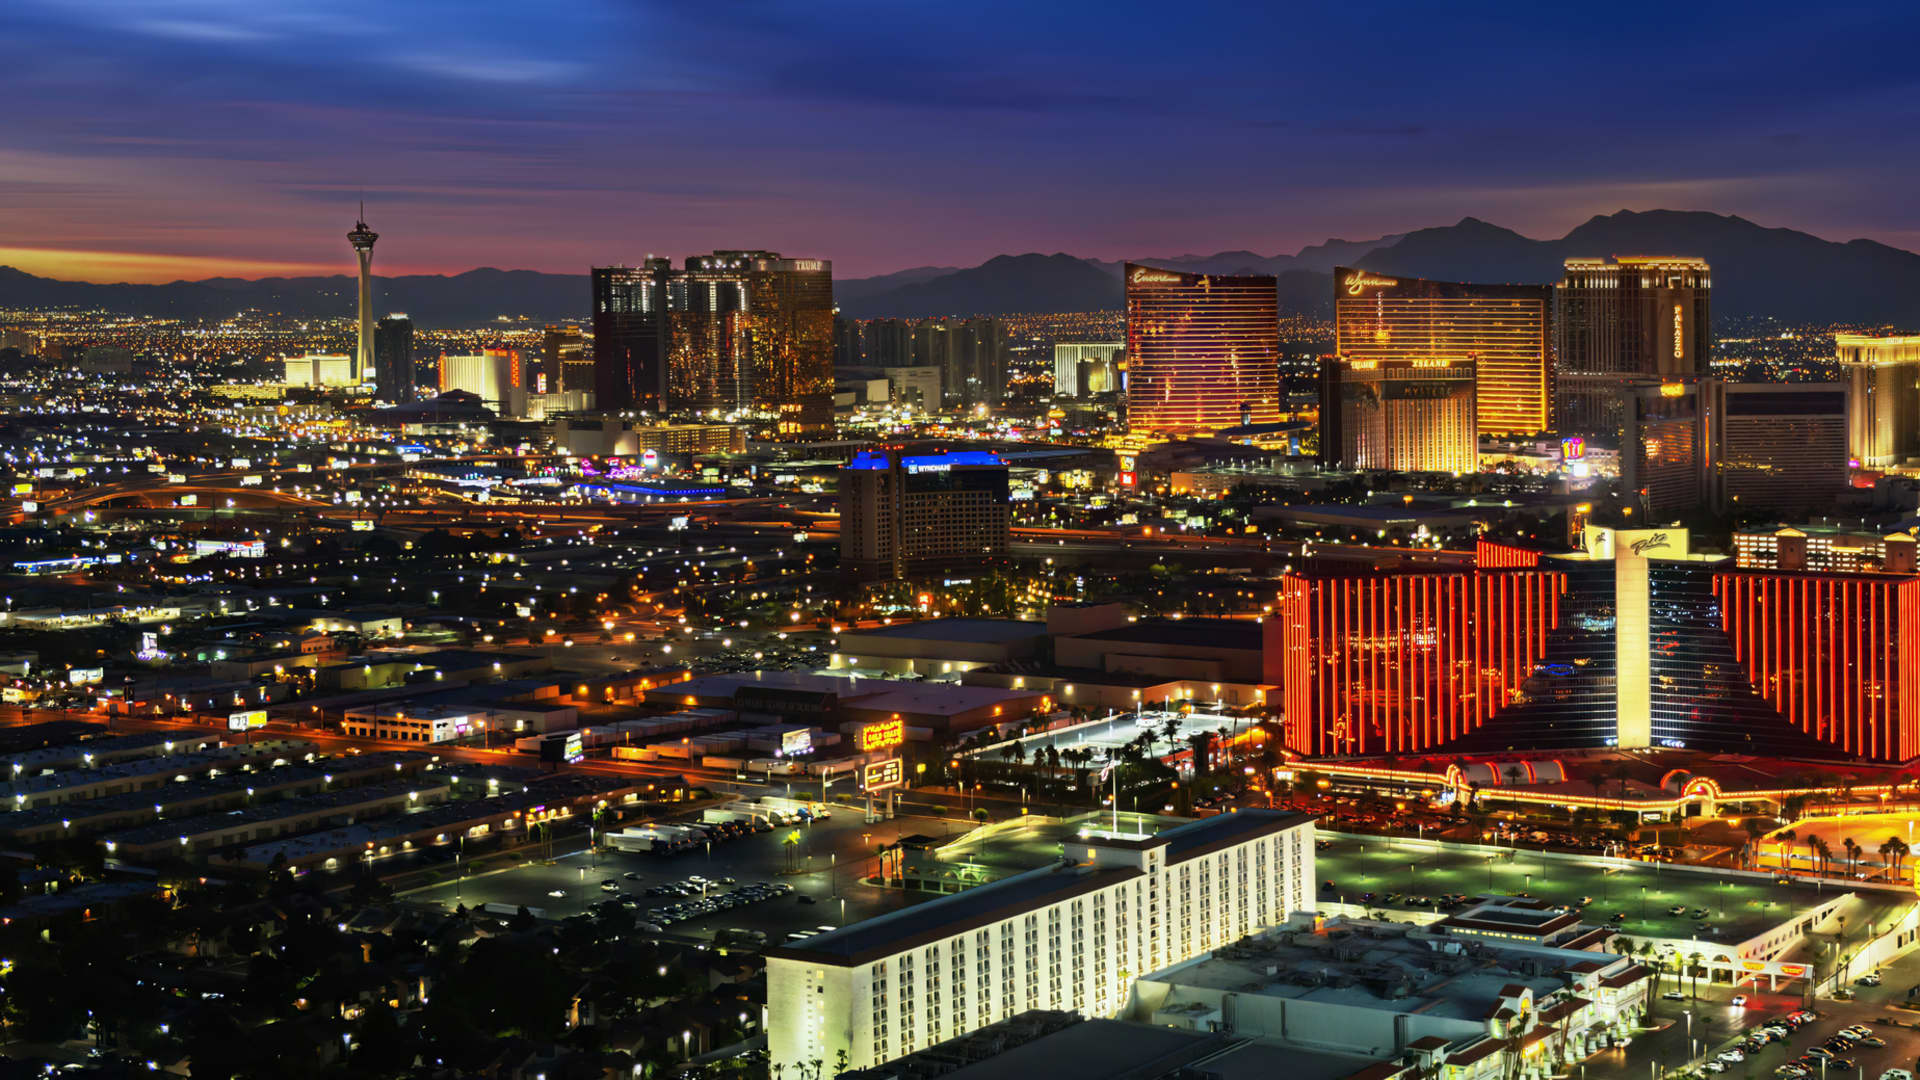 Las Vegas has invested billions into sports activities. The question is, will it pay off?